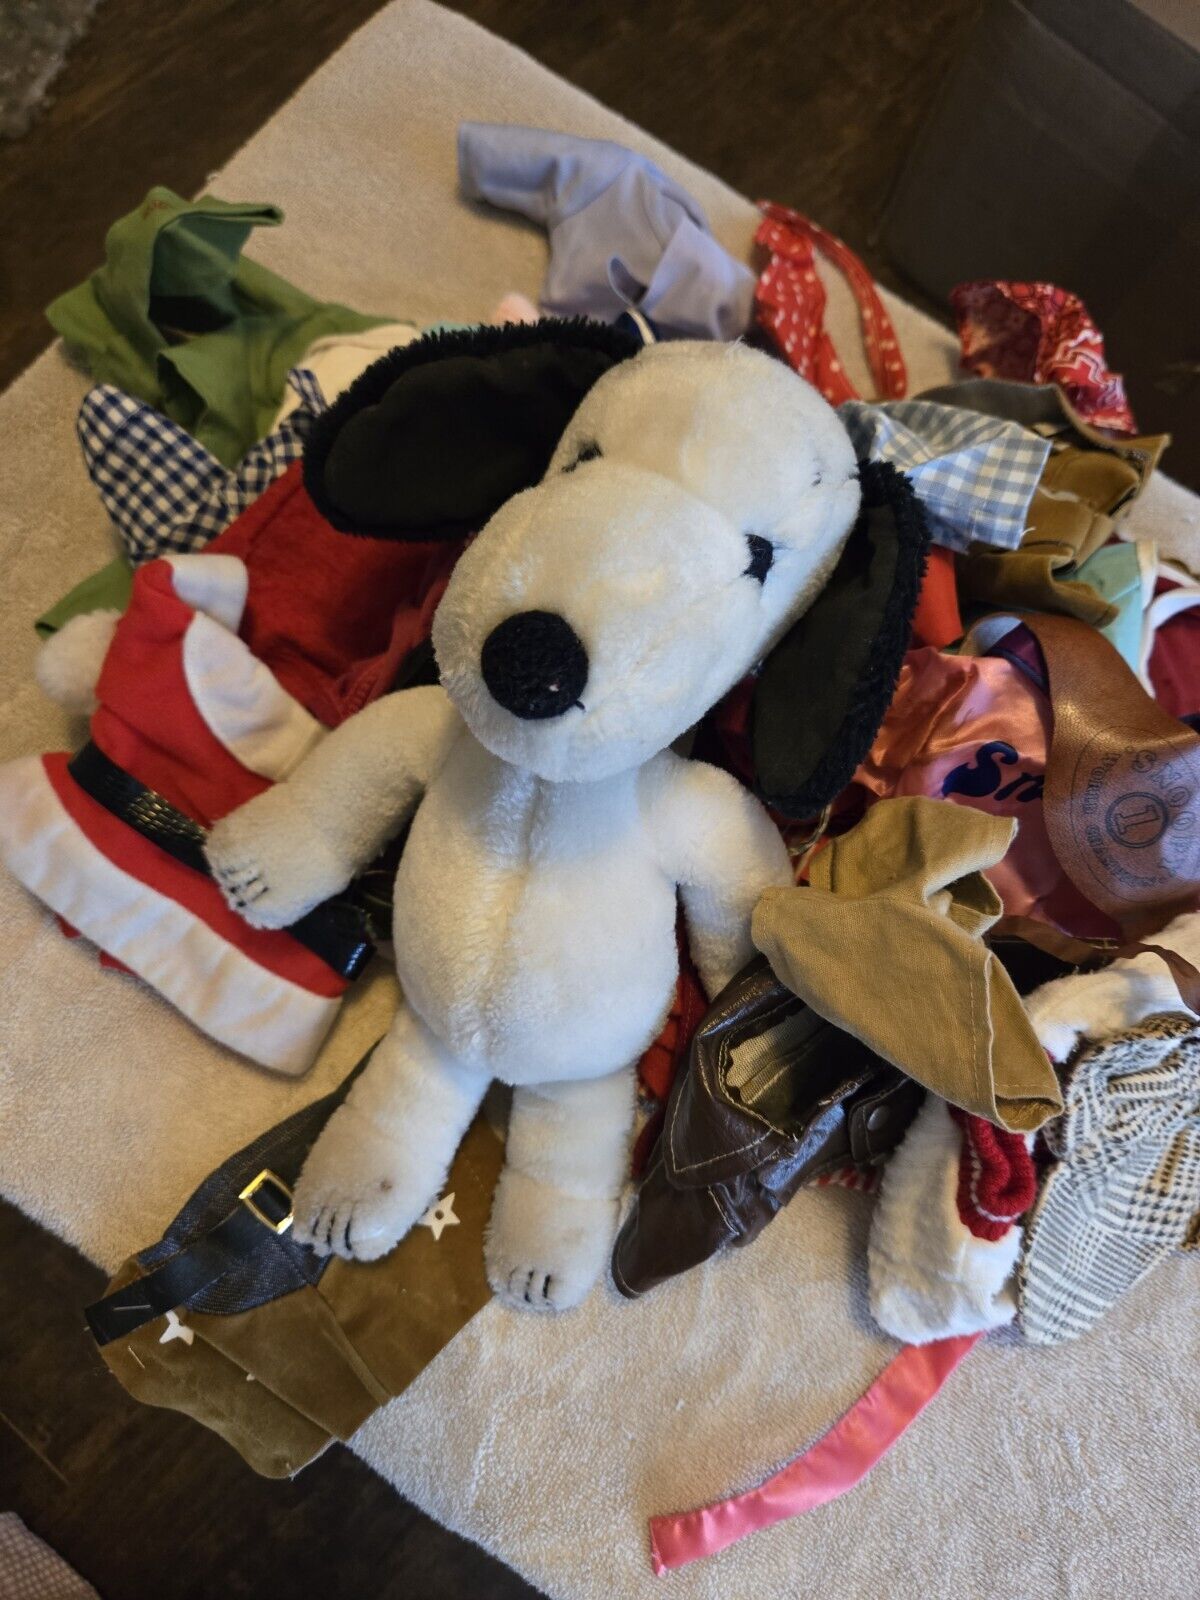 Vintage 1968 Snoopy plush with 48 pieces of clothing, and accessories..